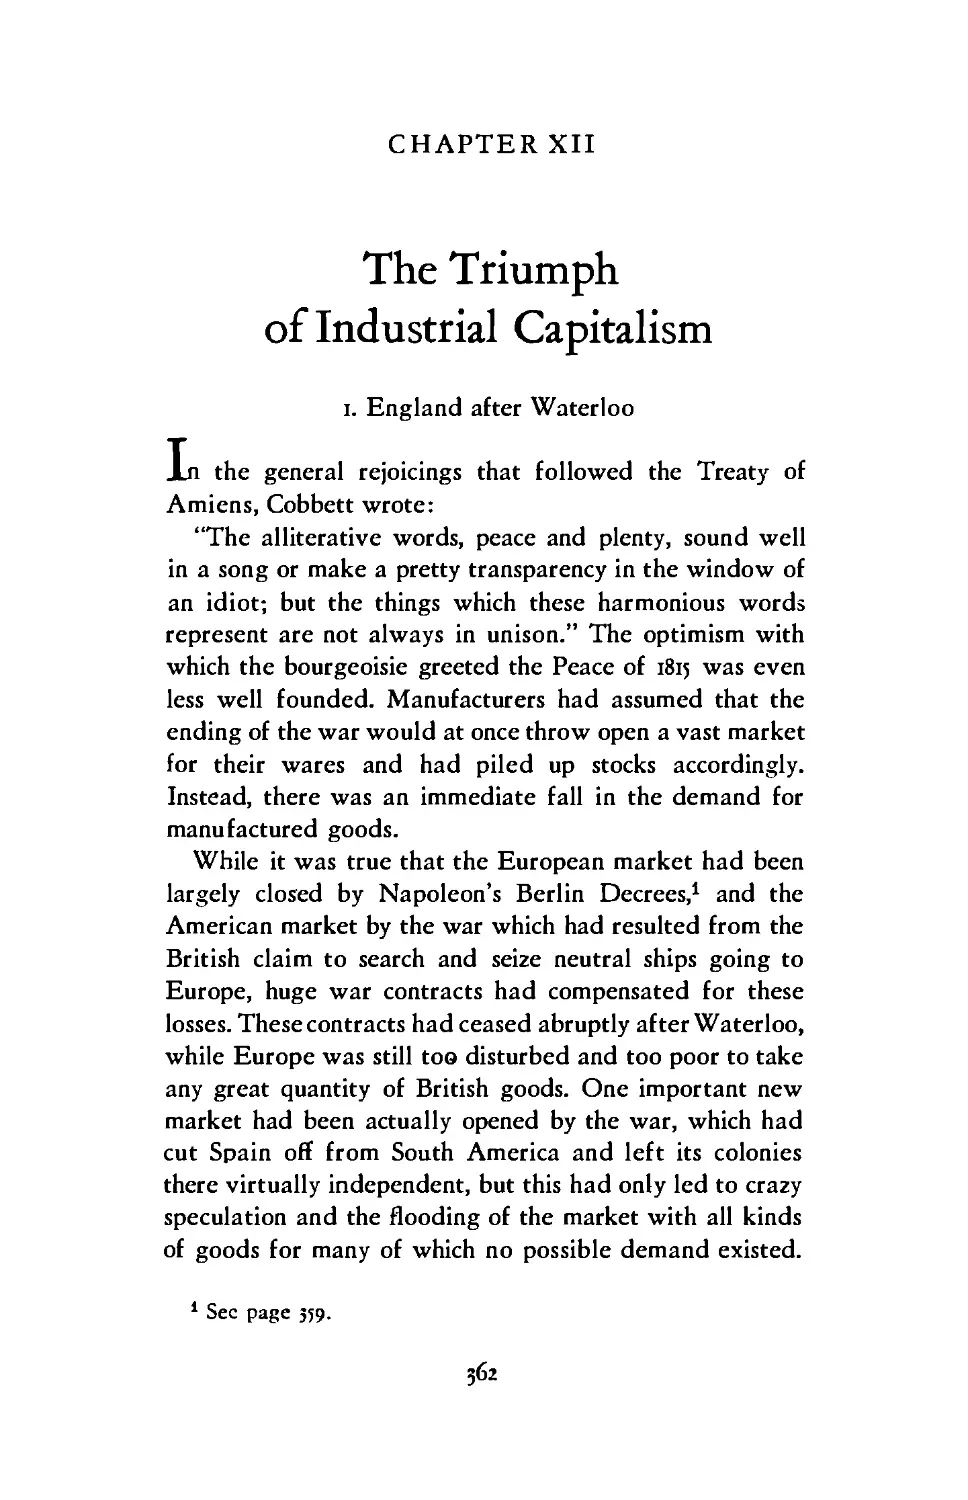 XII The Triumph of Industrial Capitalism